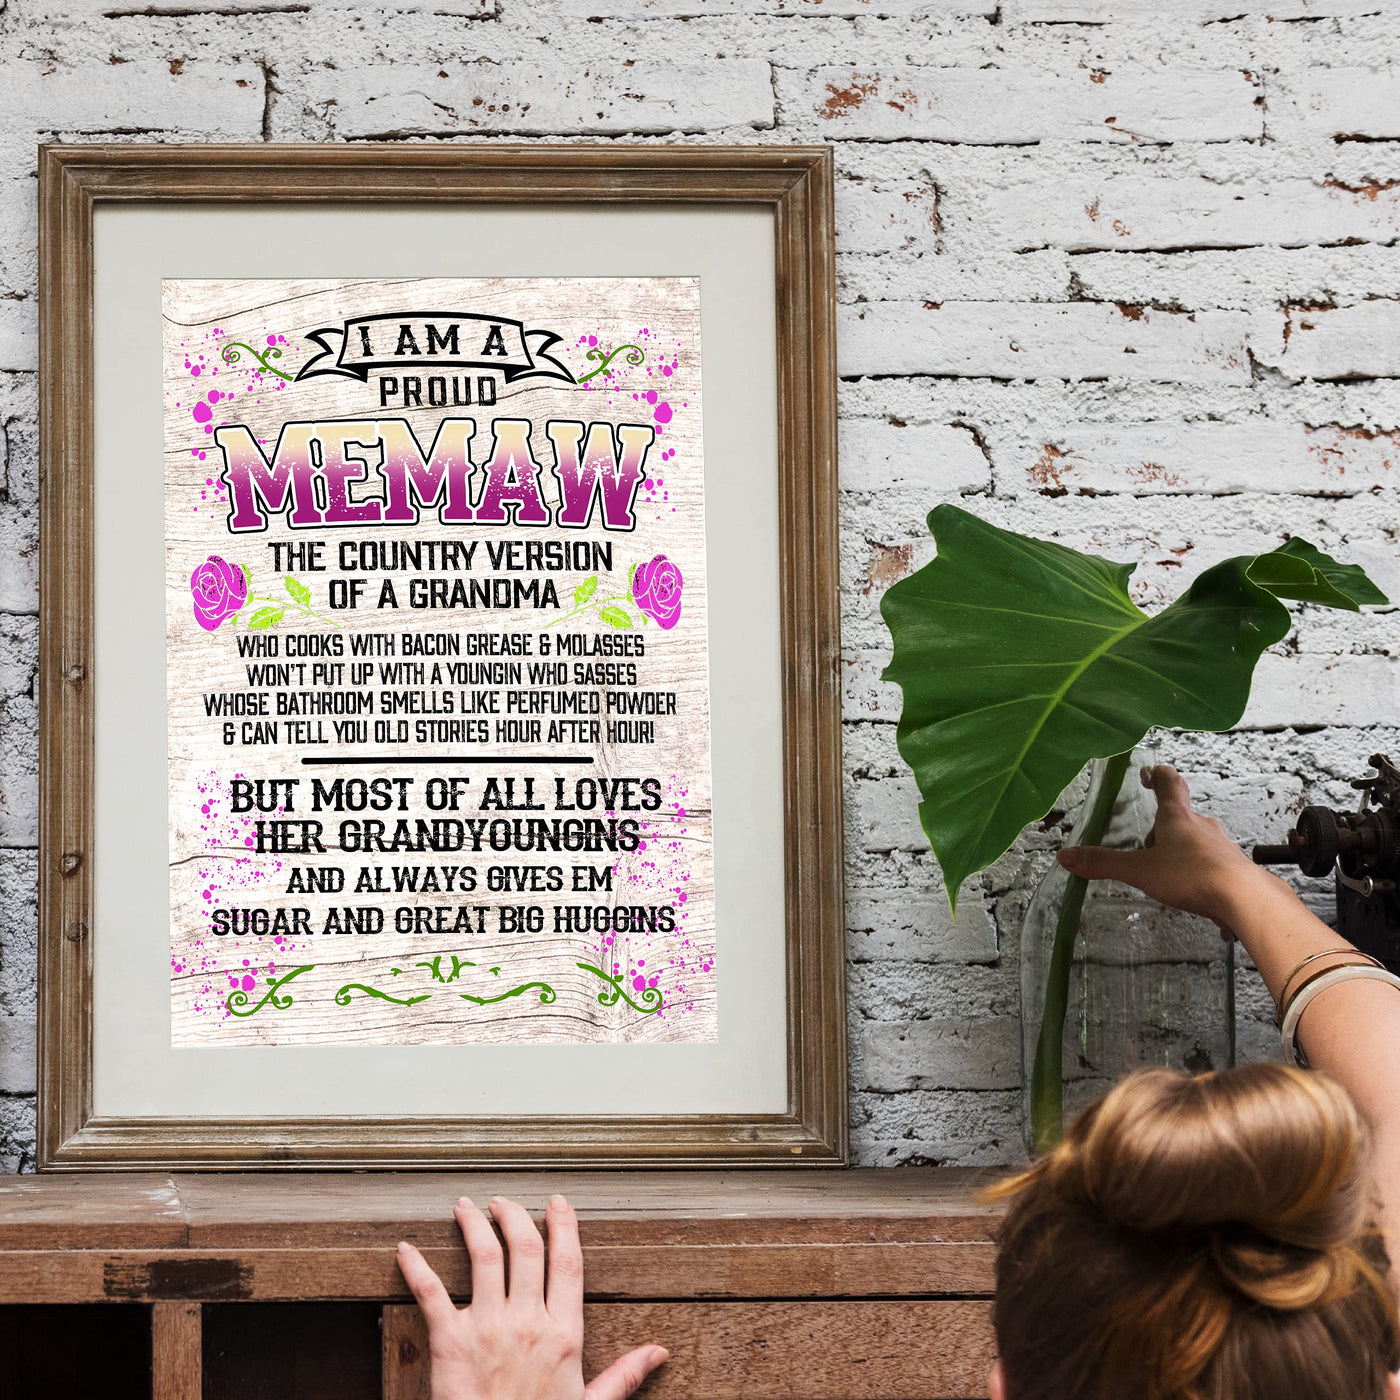 Proud Memaw-Country Version of Grandma Rustic Floral Wall Art -11 x 14" Decorative Farmhouse Print-Ready to Frame. Funny Home-Office-Welcome Decor. Great Gift for Grandmas! Printed on Photo Paper.